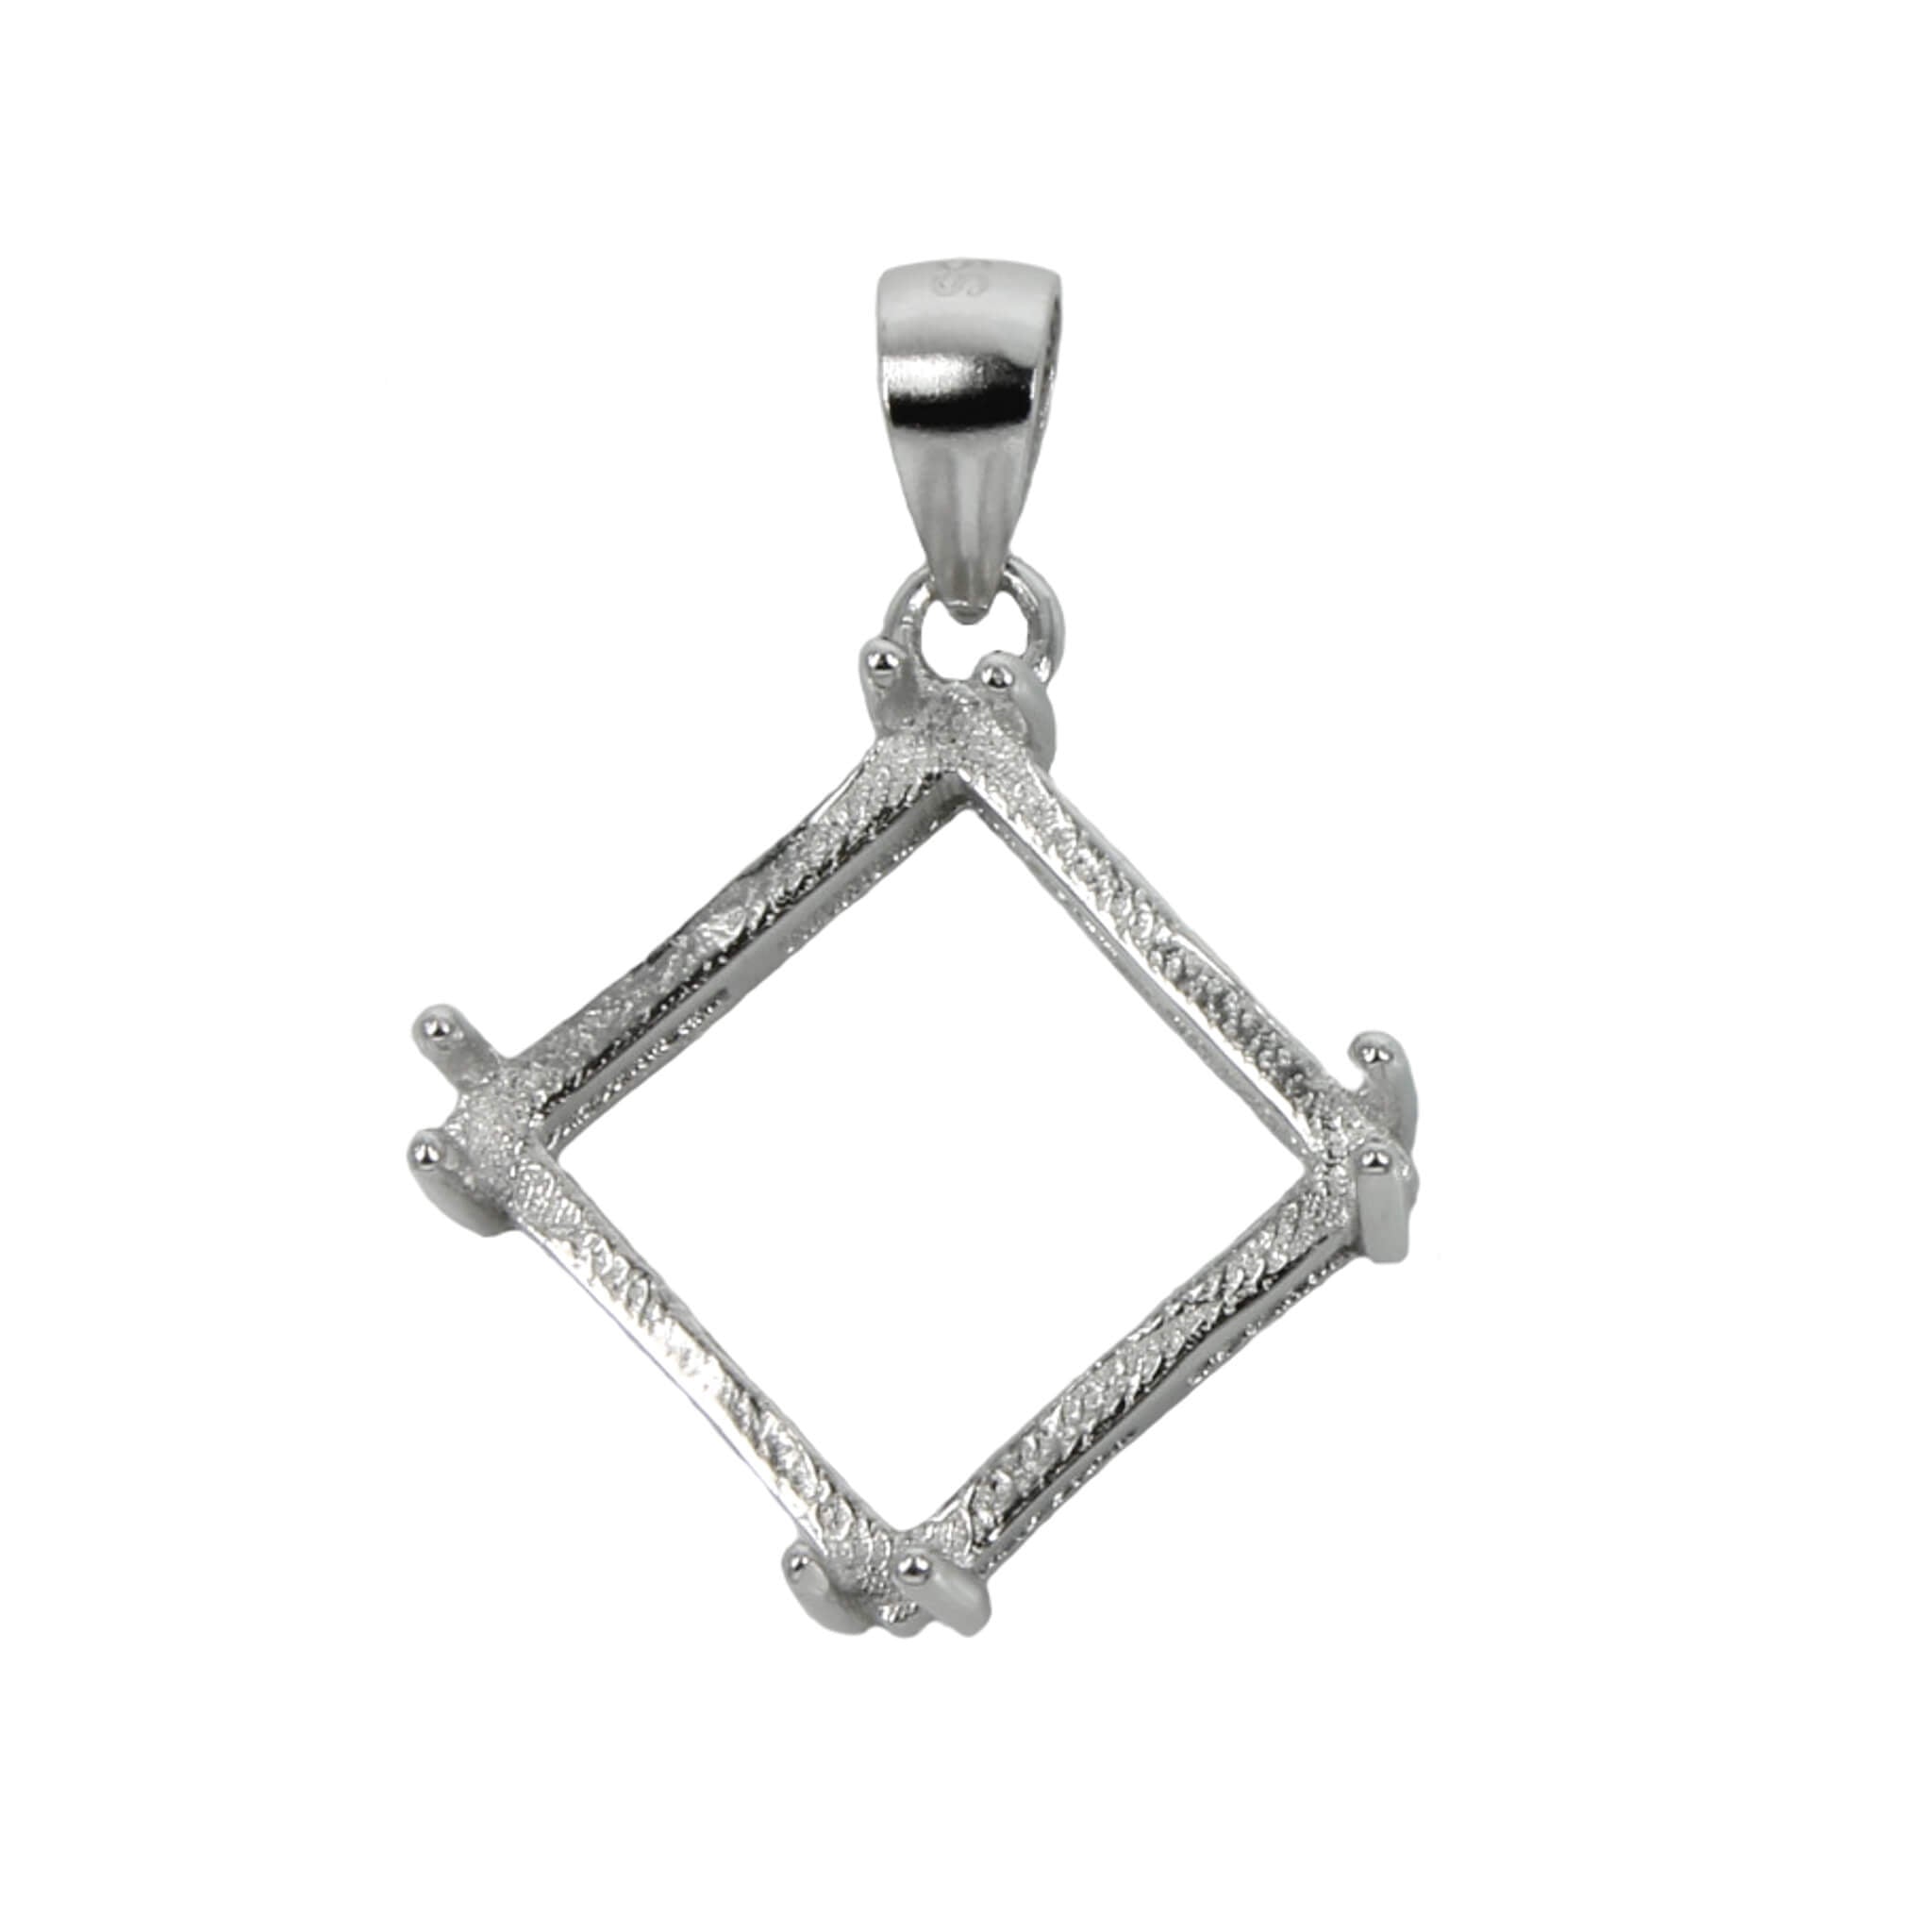 Decorative Cone Pendant Setting with Square Bezel Mounting including Bail in Sterling Silver 9x9mm